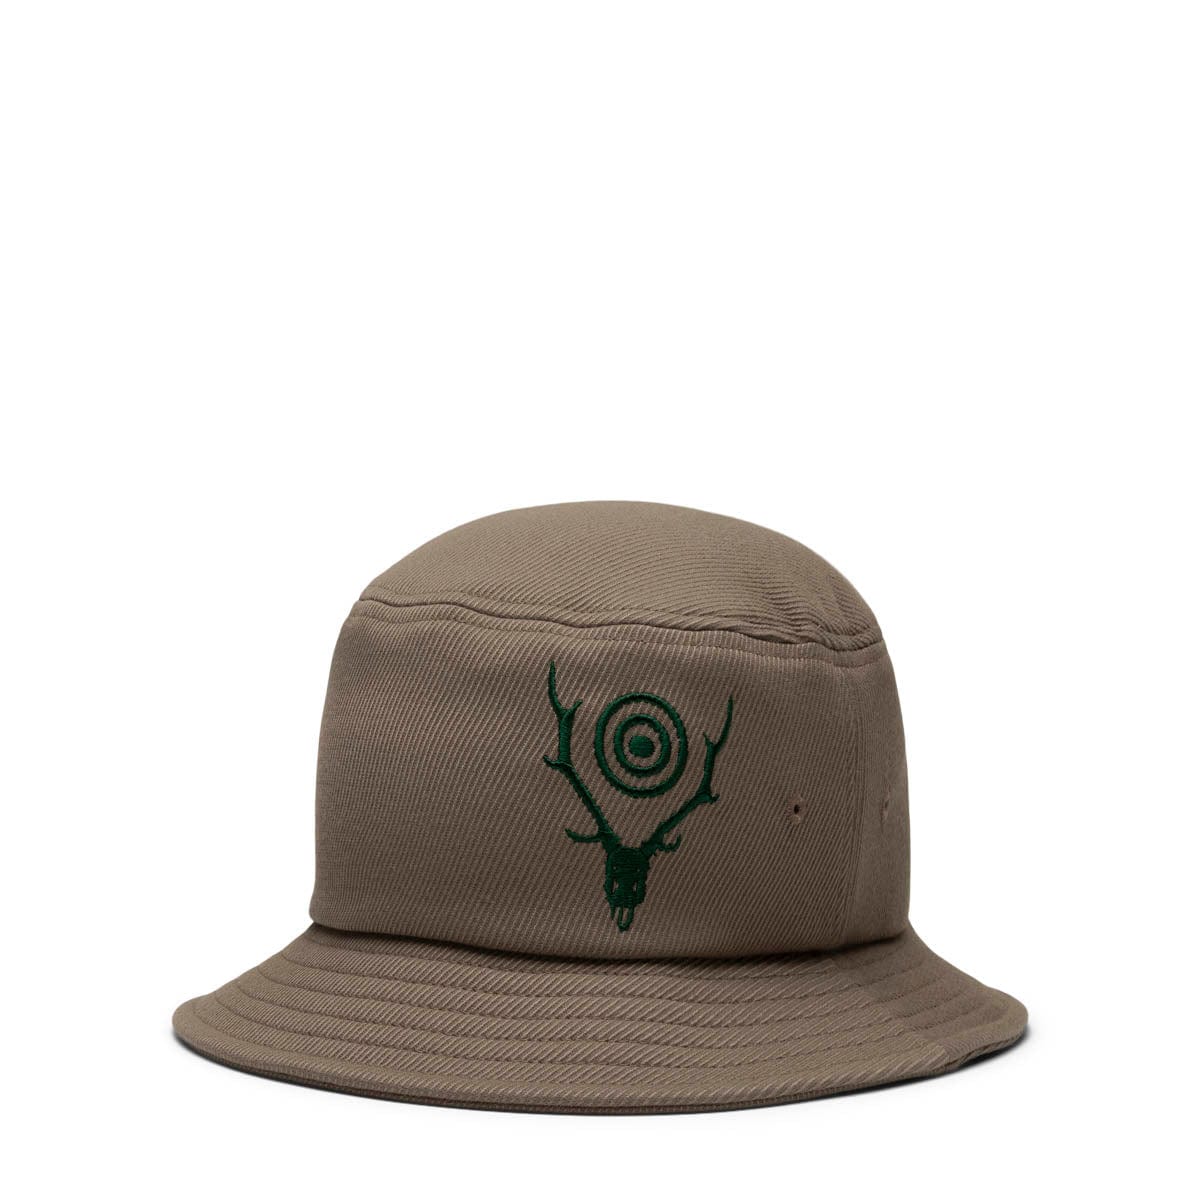 South2 West8 BUCKET HAT TAUPE